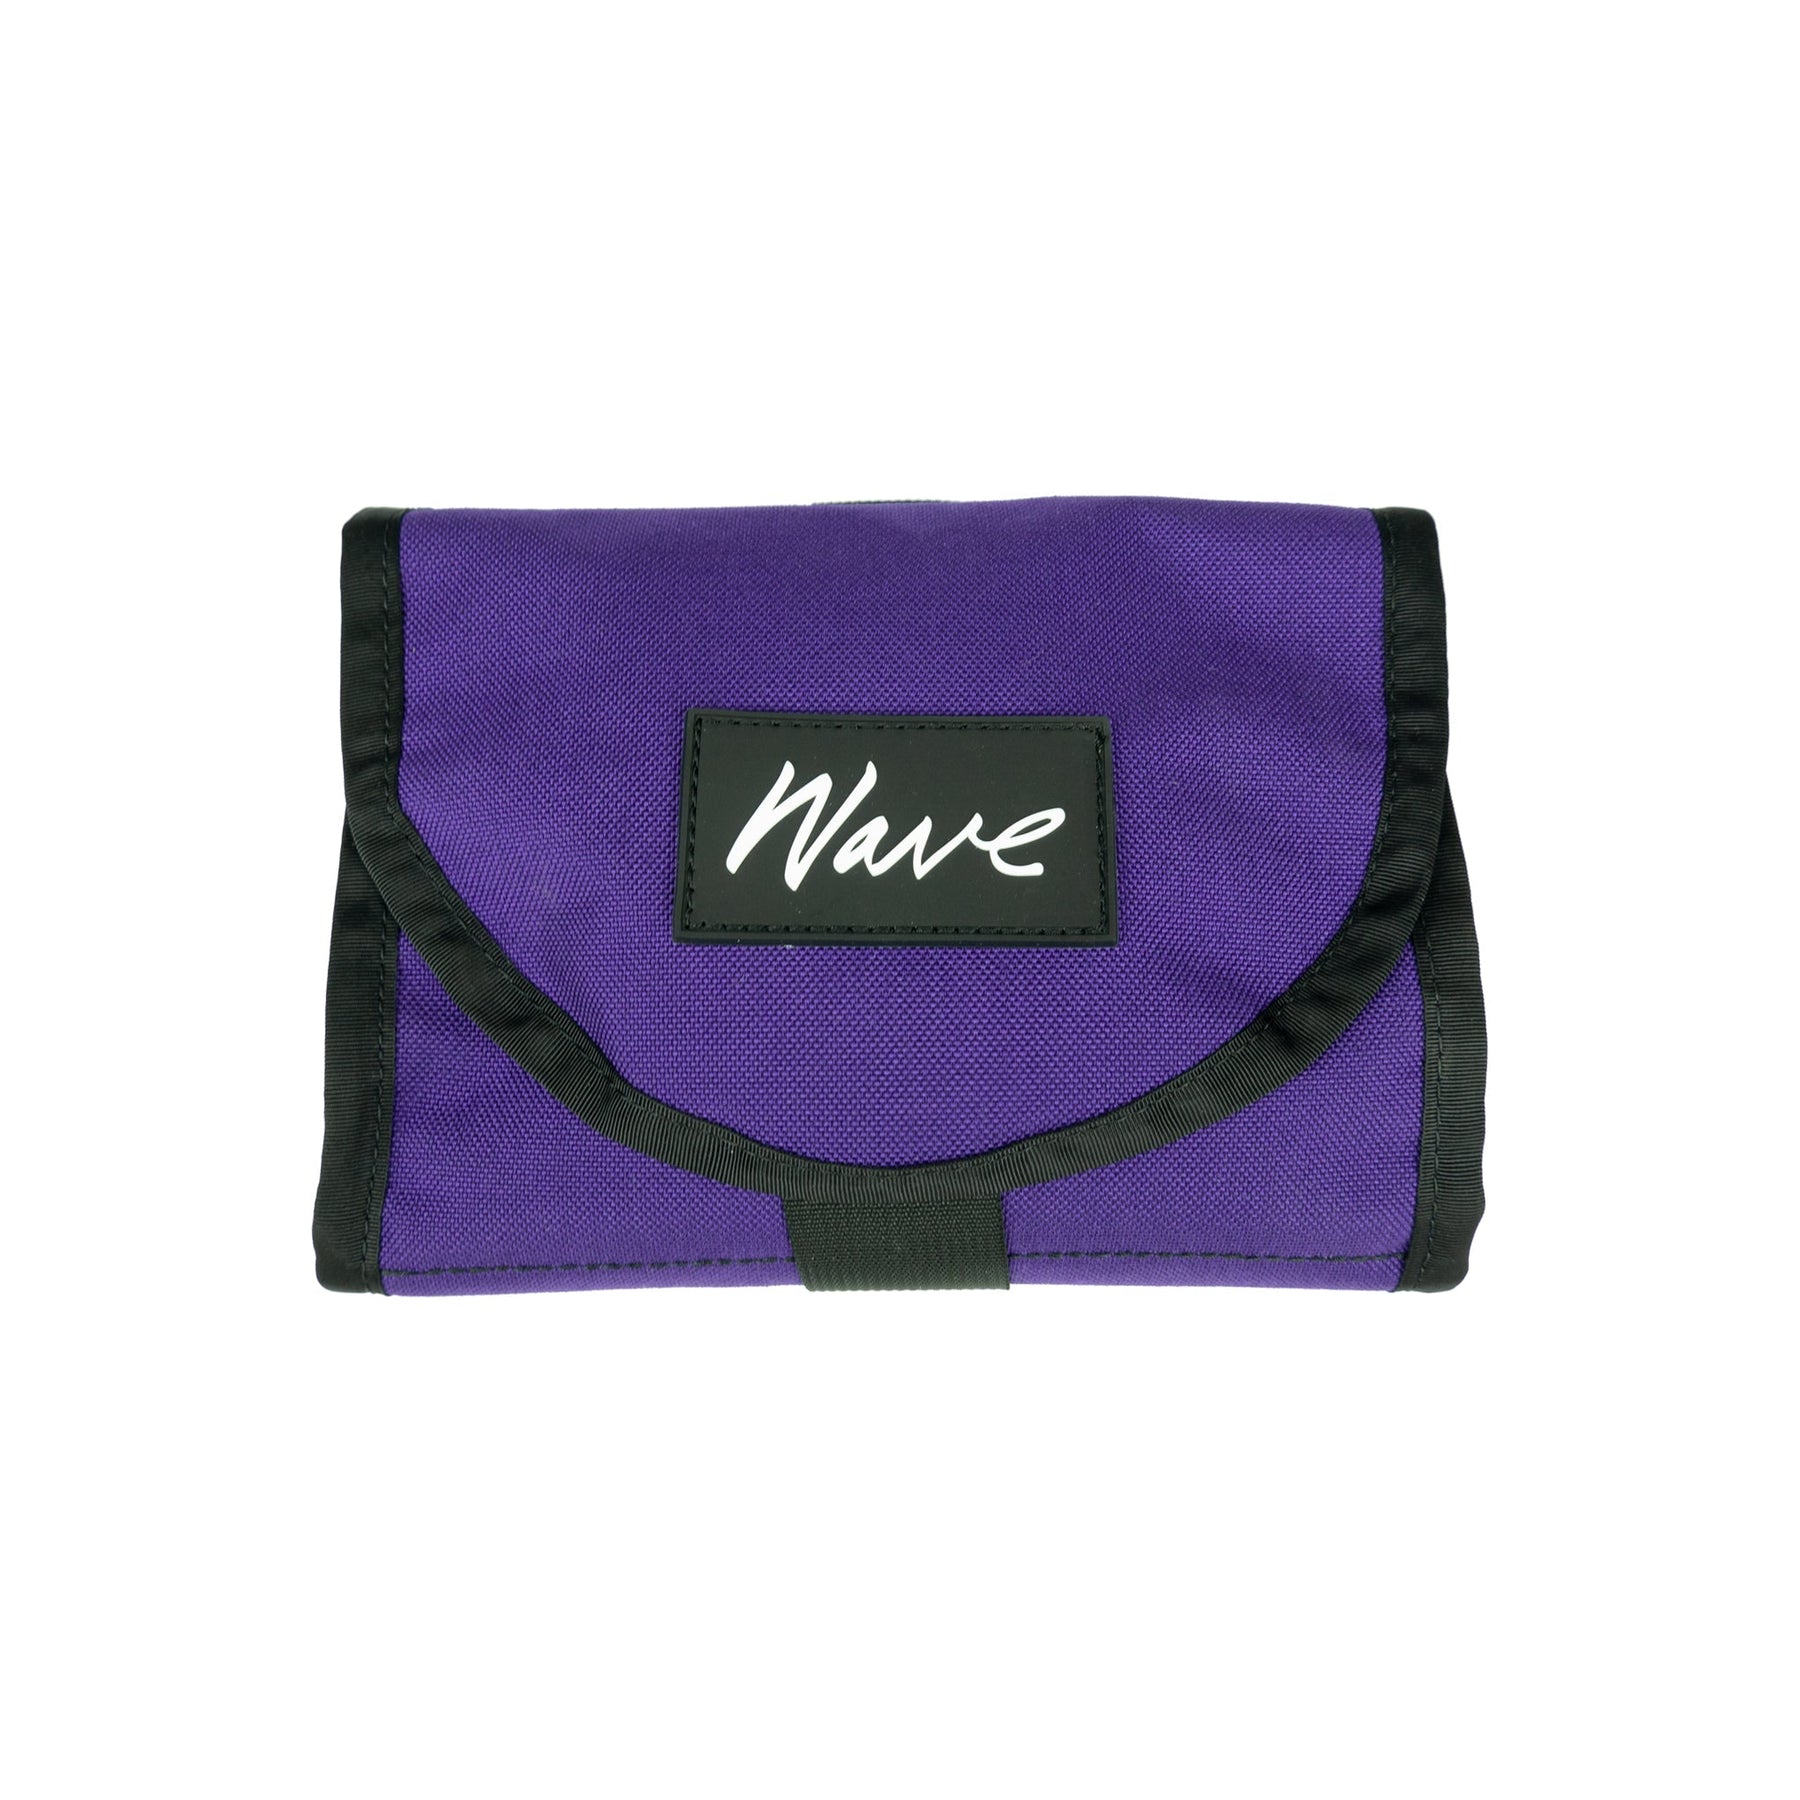 The Rollout Toiletry Bag